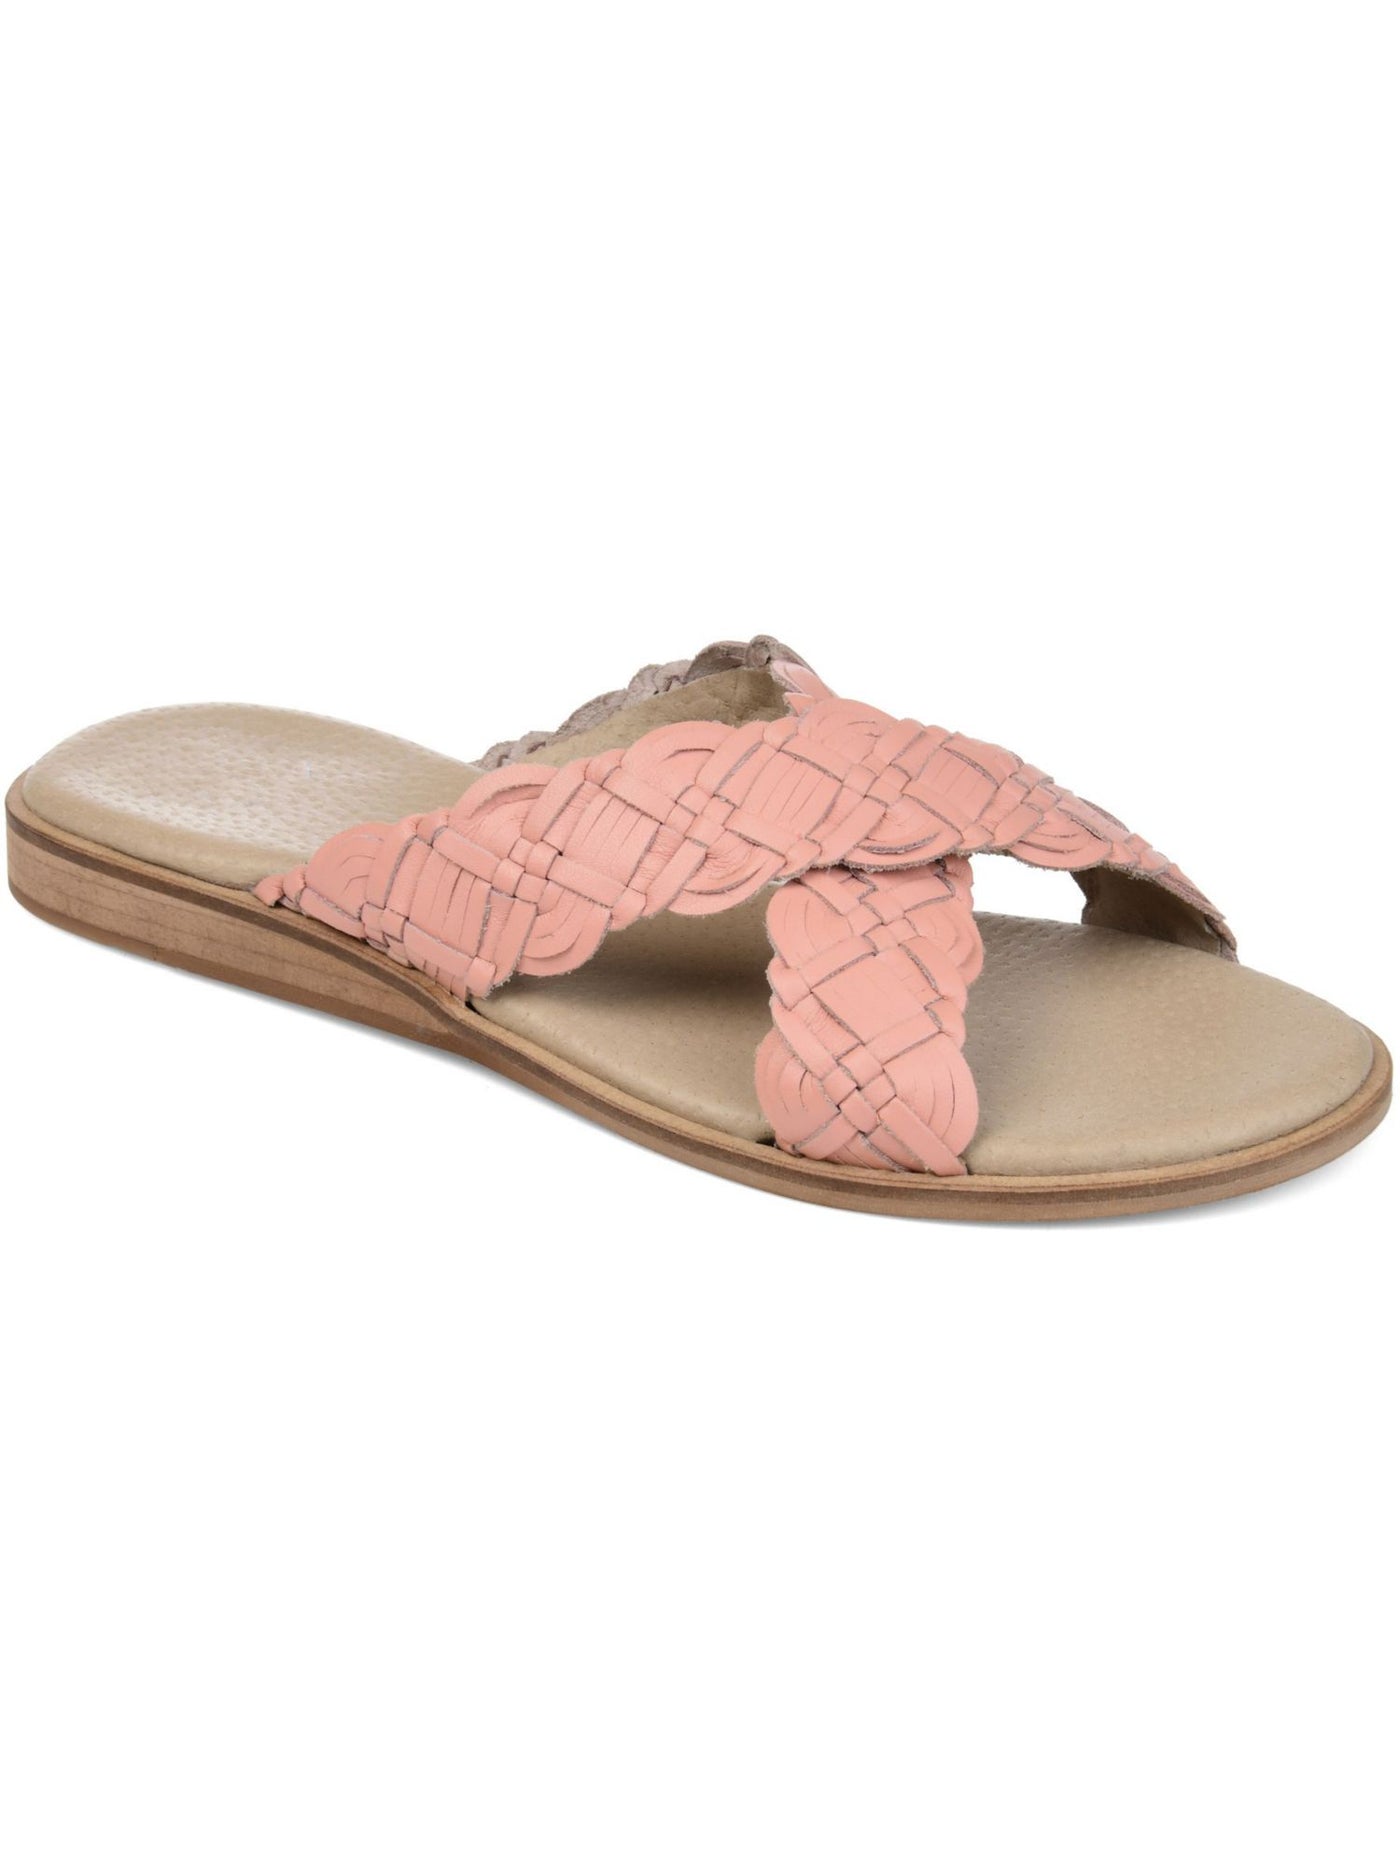 JOURNEE COLLECTION Womens Pink Braided Cushioned Bryson Open Toe Wedge Slip On Sandals Shoes 8.5 M